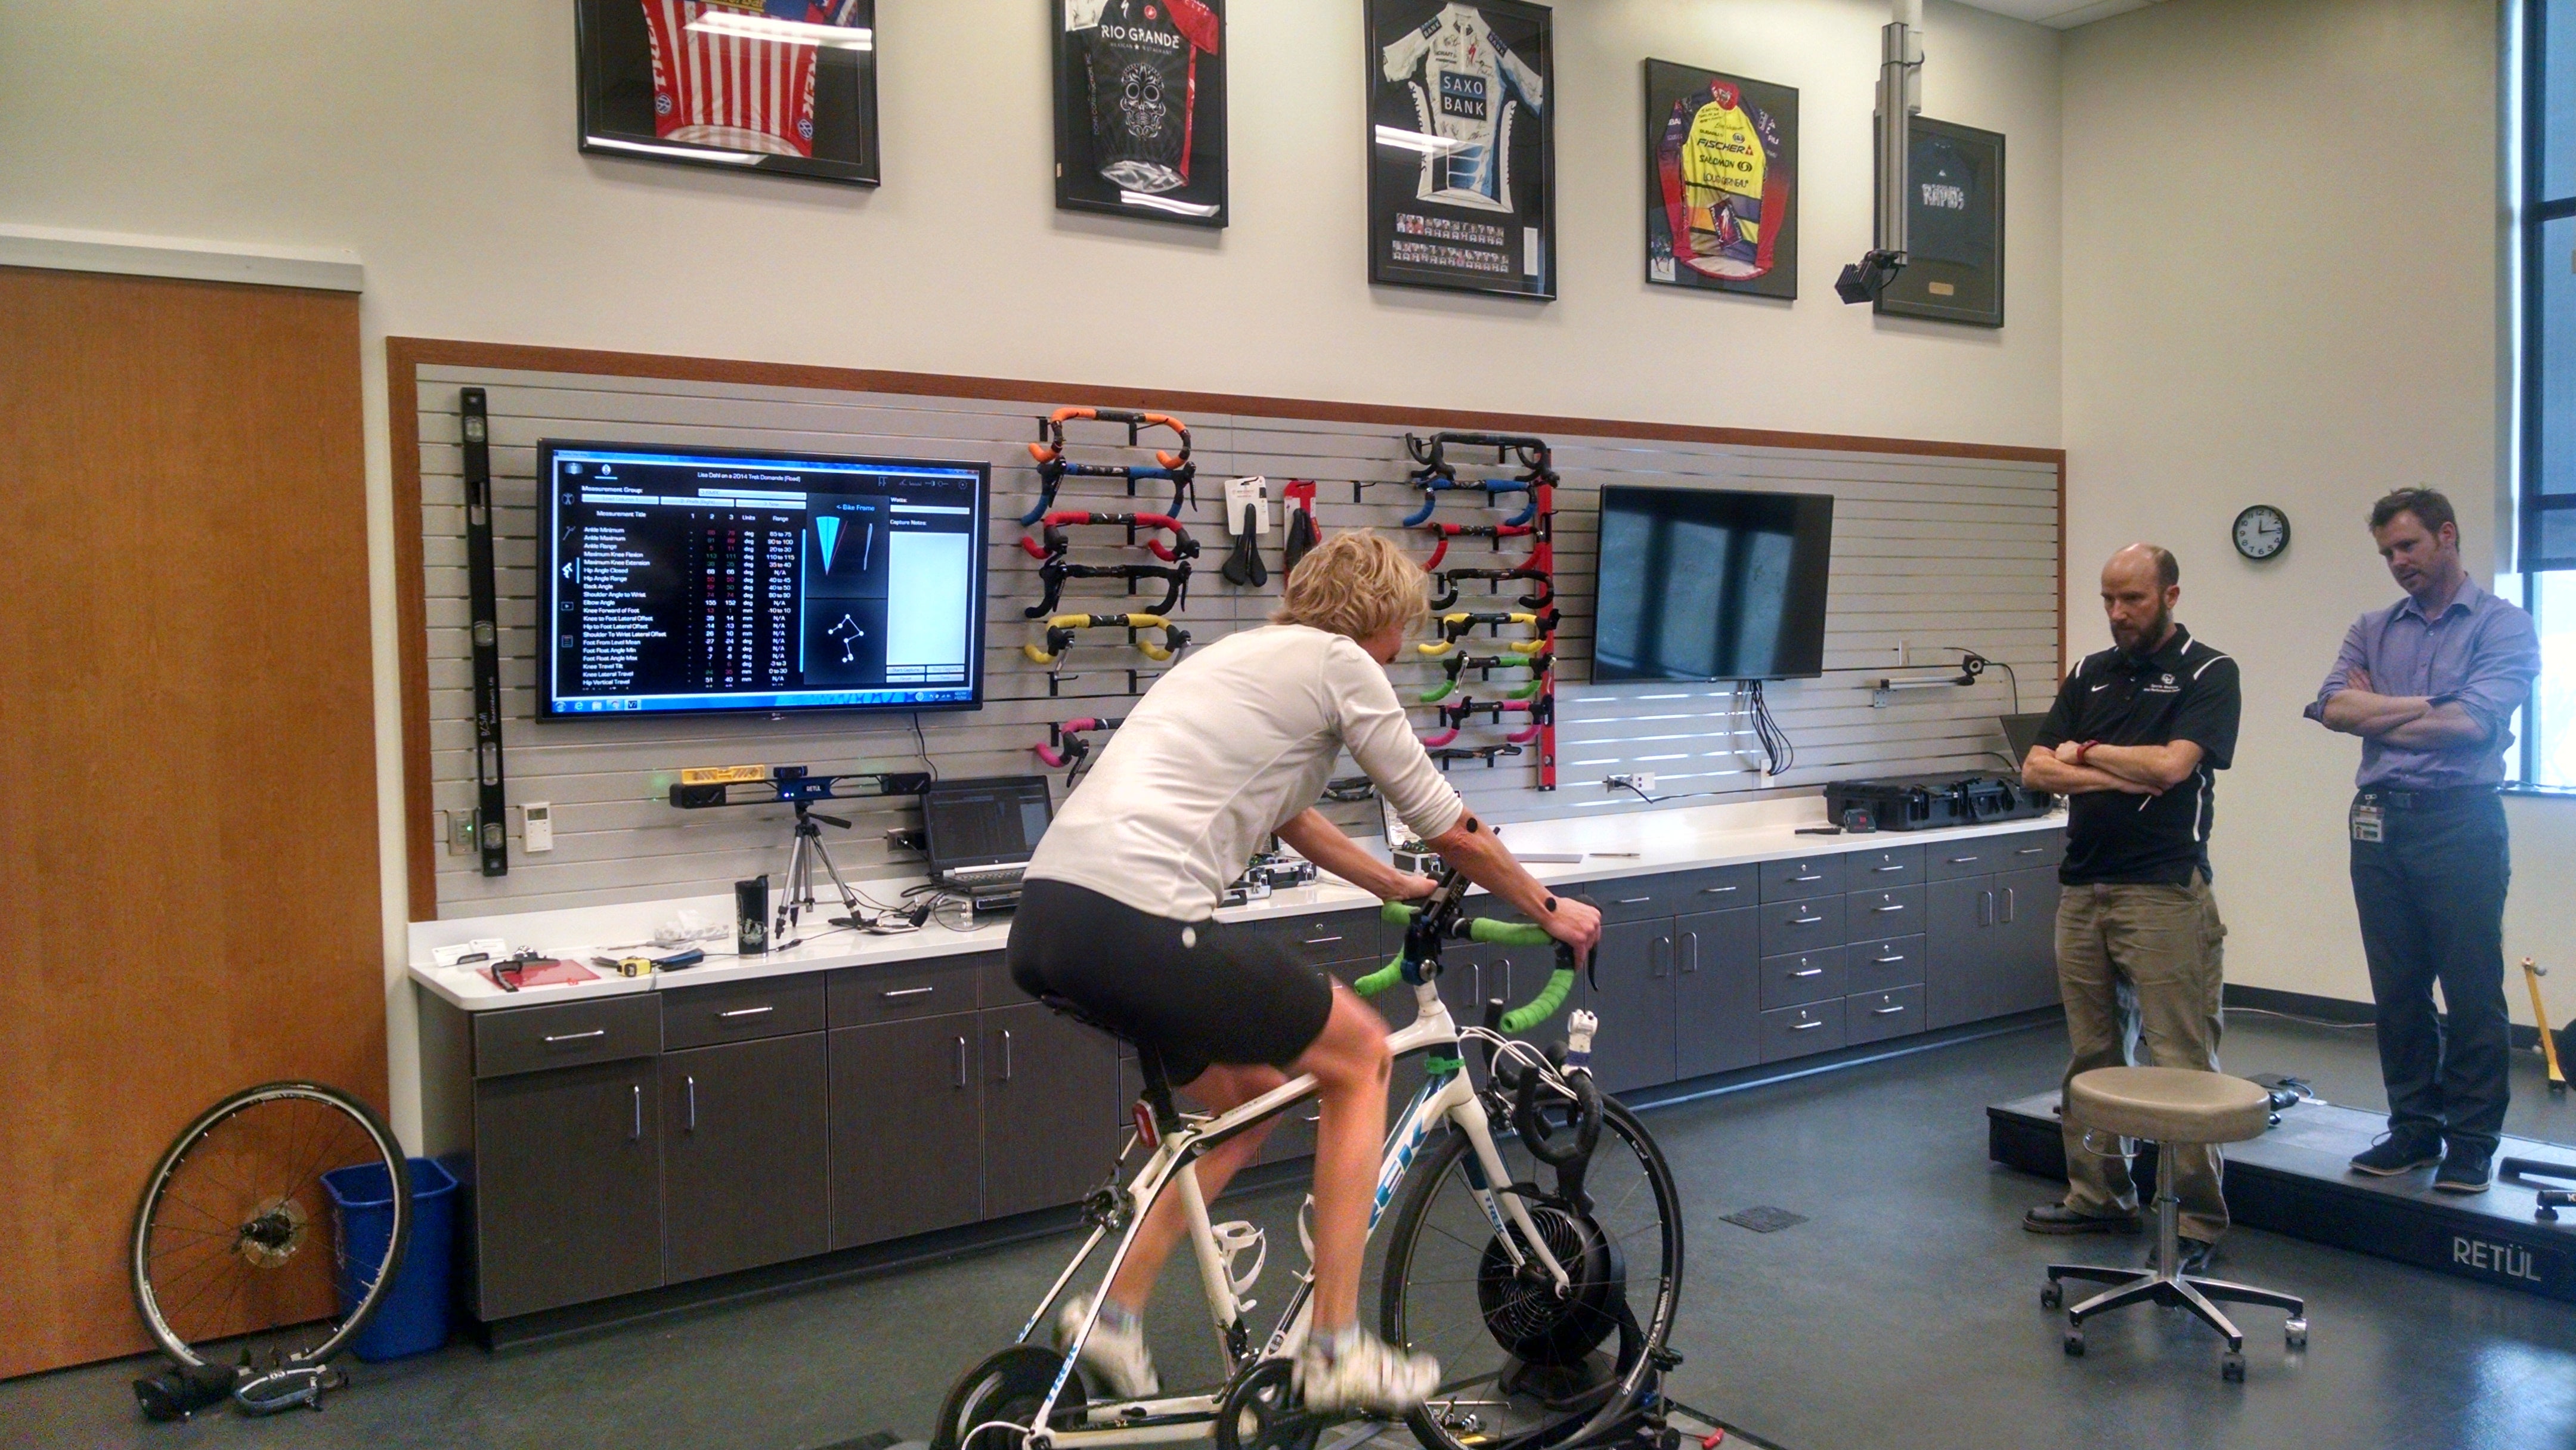 A client receives a cycling biomechanic consultation